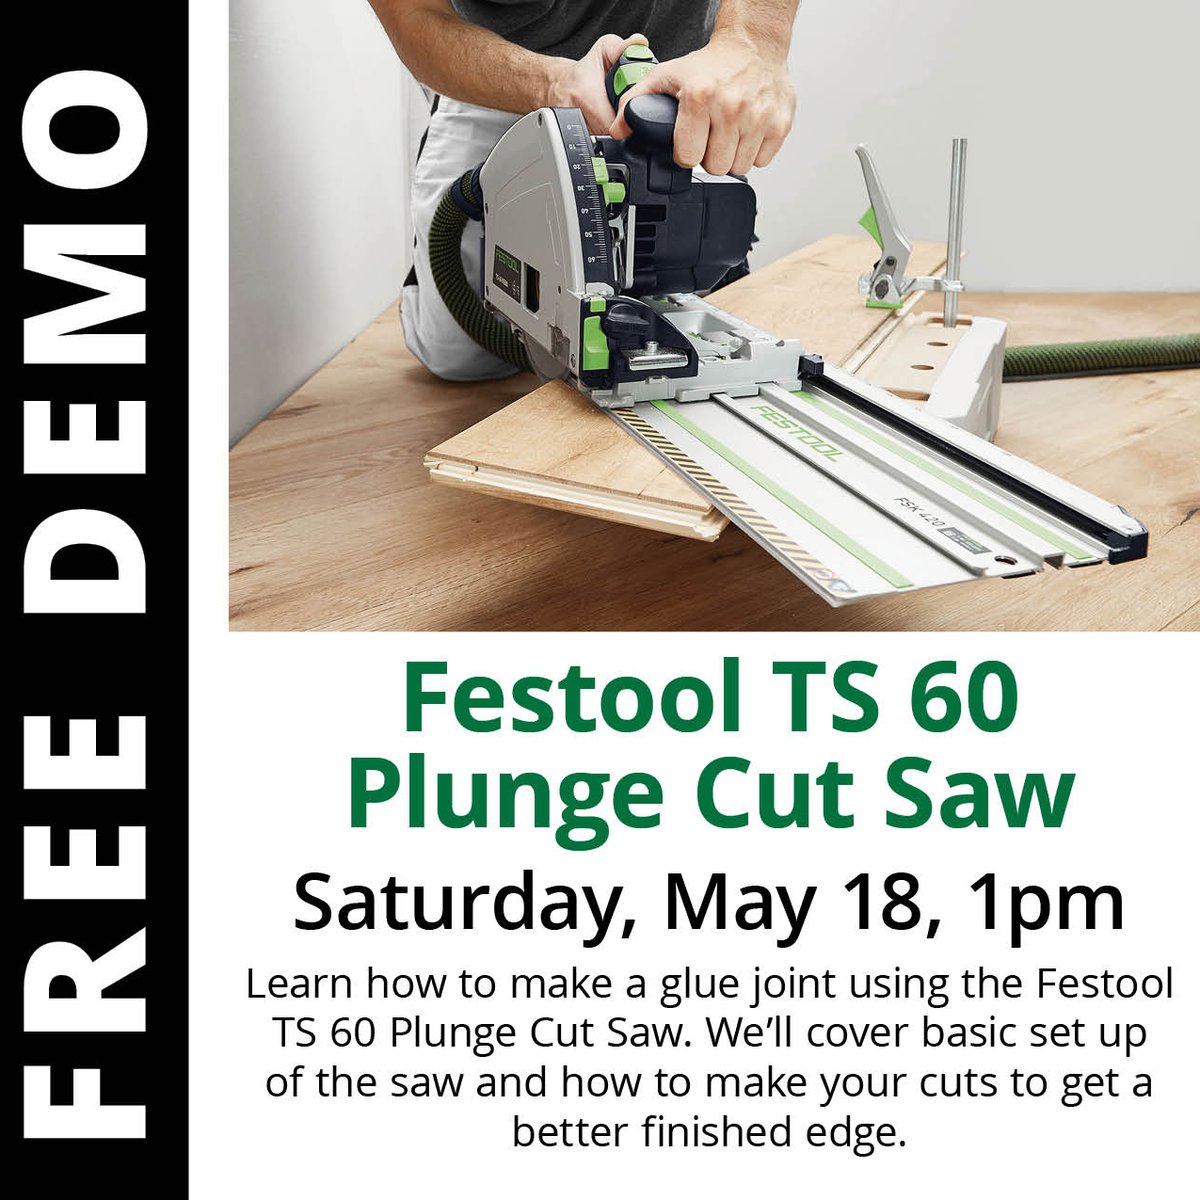 Checkout the free demos happening at your local Woodcraft this month. 

Stop in May 11 to learn how to properly keep your bandsaw in top working order.

Come back May 18 to learn the basics of the Festool TS 60 Plunge Cut Saw.

Find your local Woodcraft bit.ly/44g1Gv0